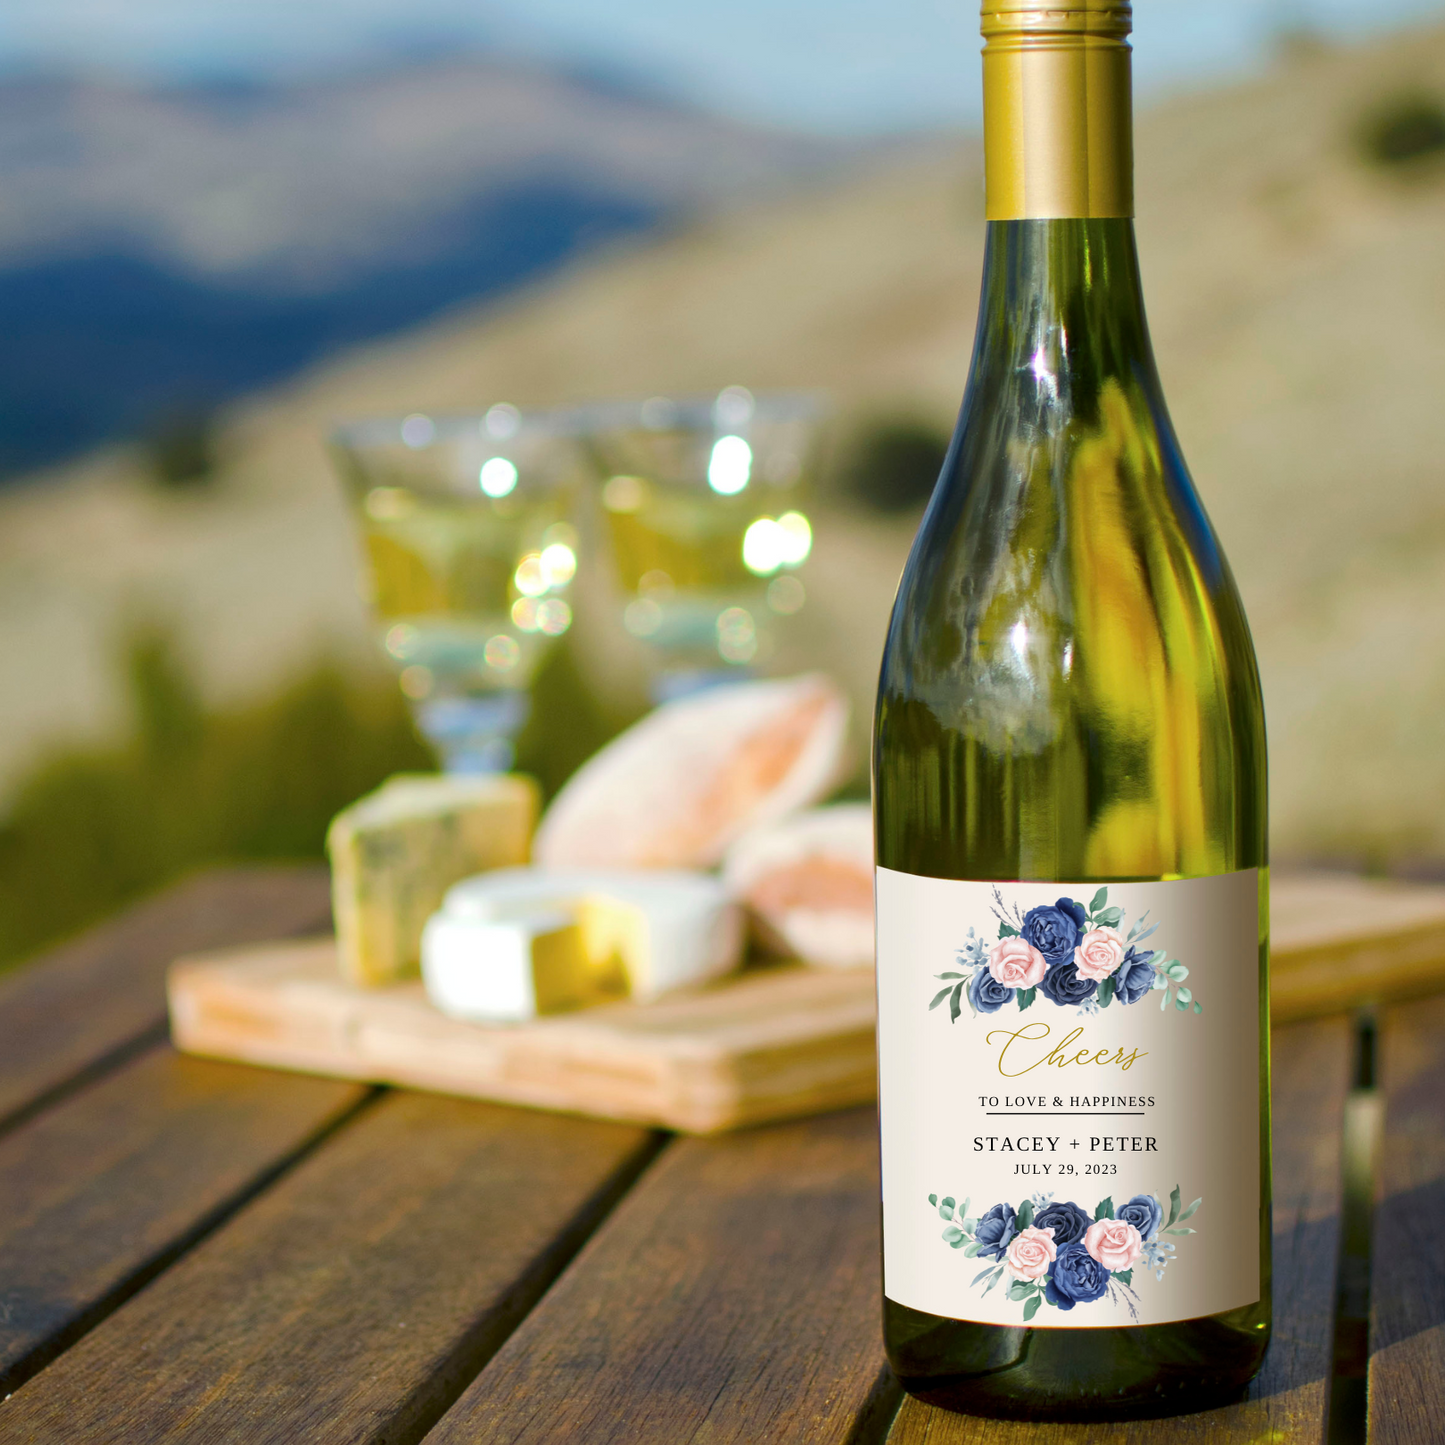 A bottle of wine sits on a wooden table at the edge of a cliff. Two glasses of wine and a cheese plate sit behind the bottle of wine. On the bottle's label, there are two clusters of blue and blush coloured roses: one on the top and one on the bottom. In between the flowers are the words "Cheers to love and happiness" and "Stacey + Peter... July 29, 2023".